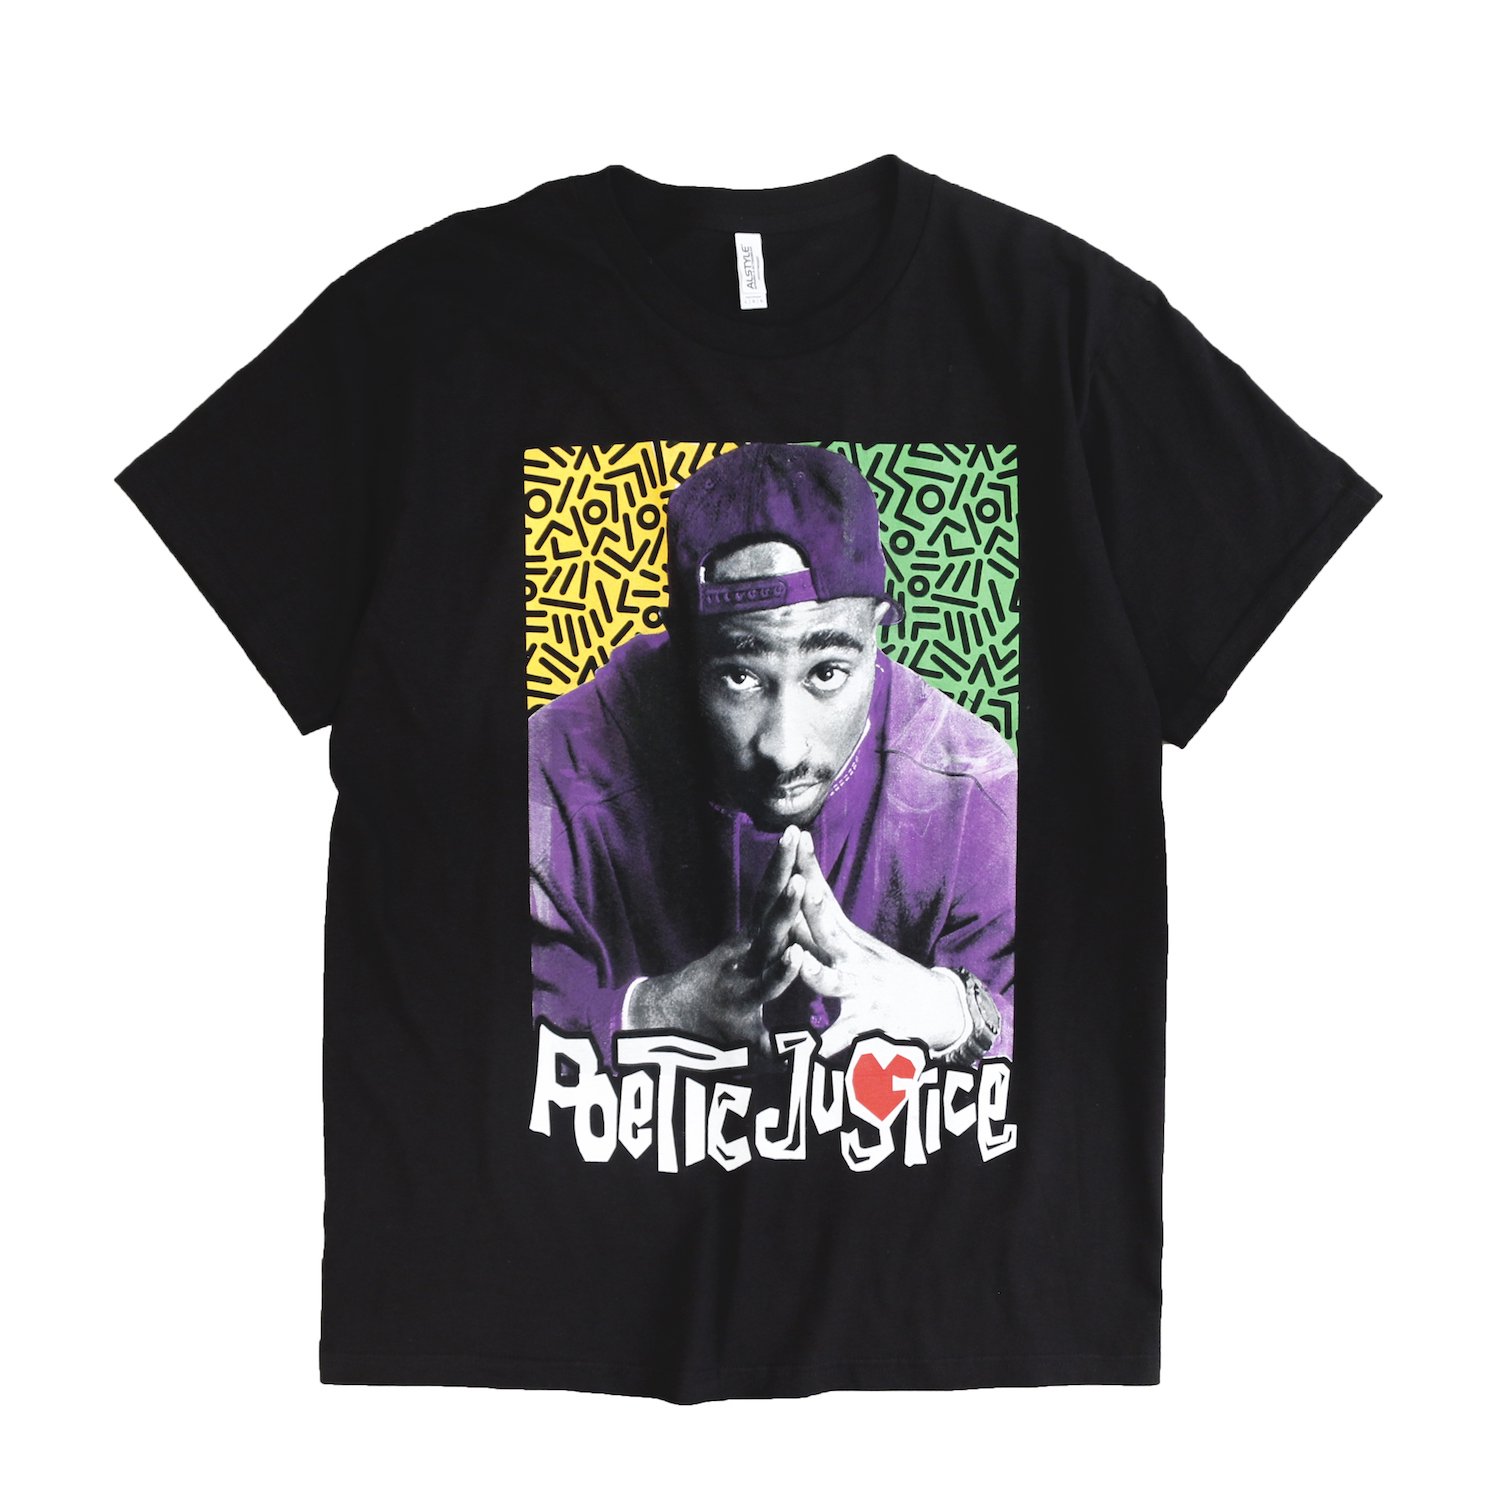 <img class='new_mark_img1' src='https://img.shop-pro.jp/img/new/icons8.gif' style='border:none;display:inline;margin:0px;padding:0px;width:auto;' /> Music Tee / S/S 2PAC 